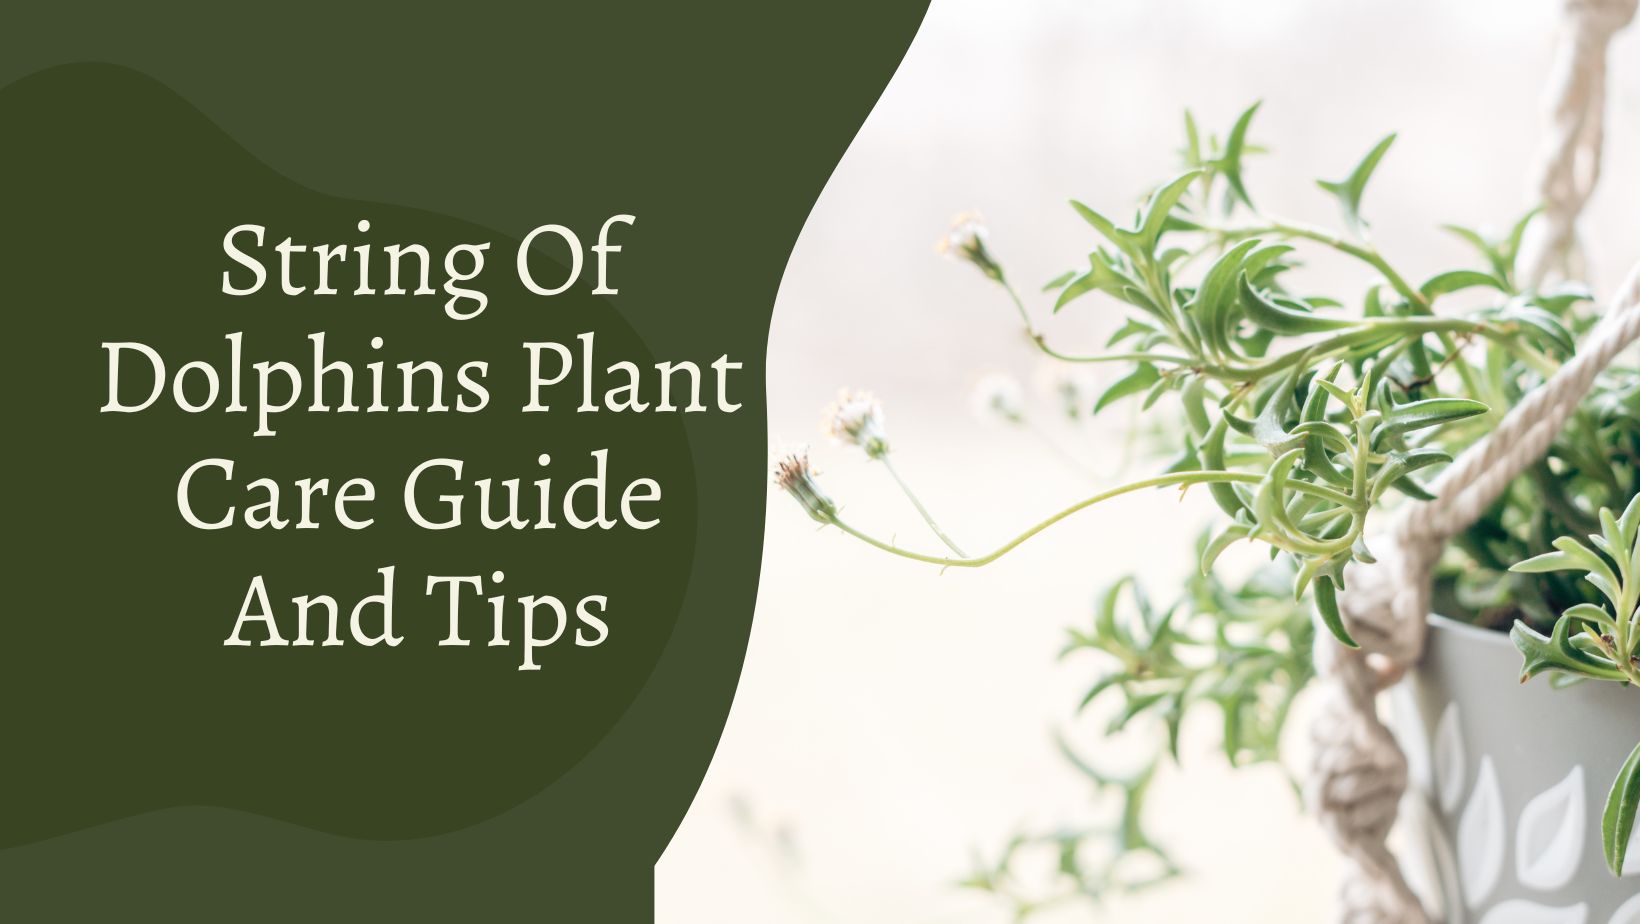 String Of Dolphins Plant Guide